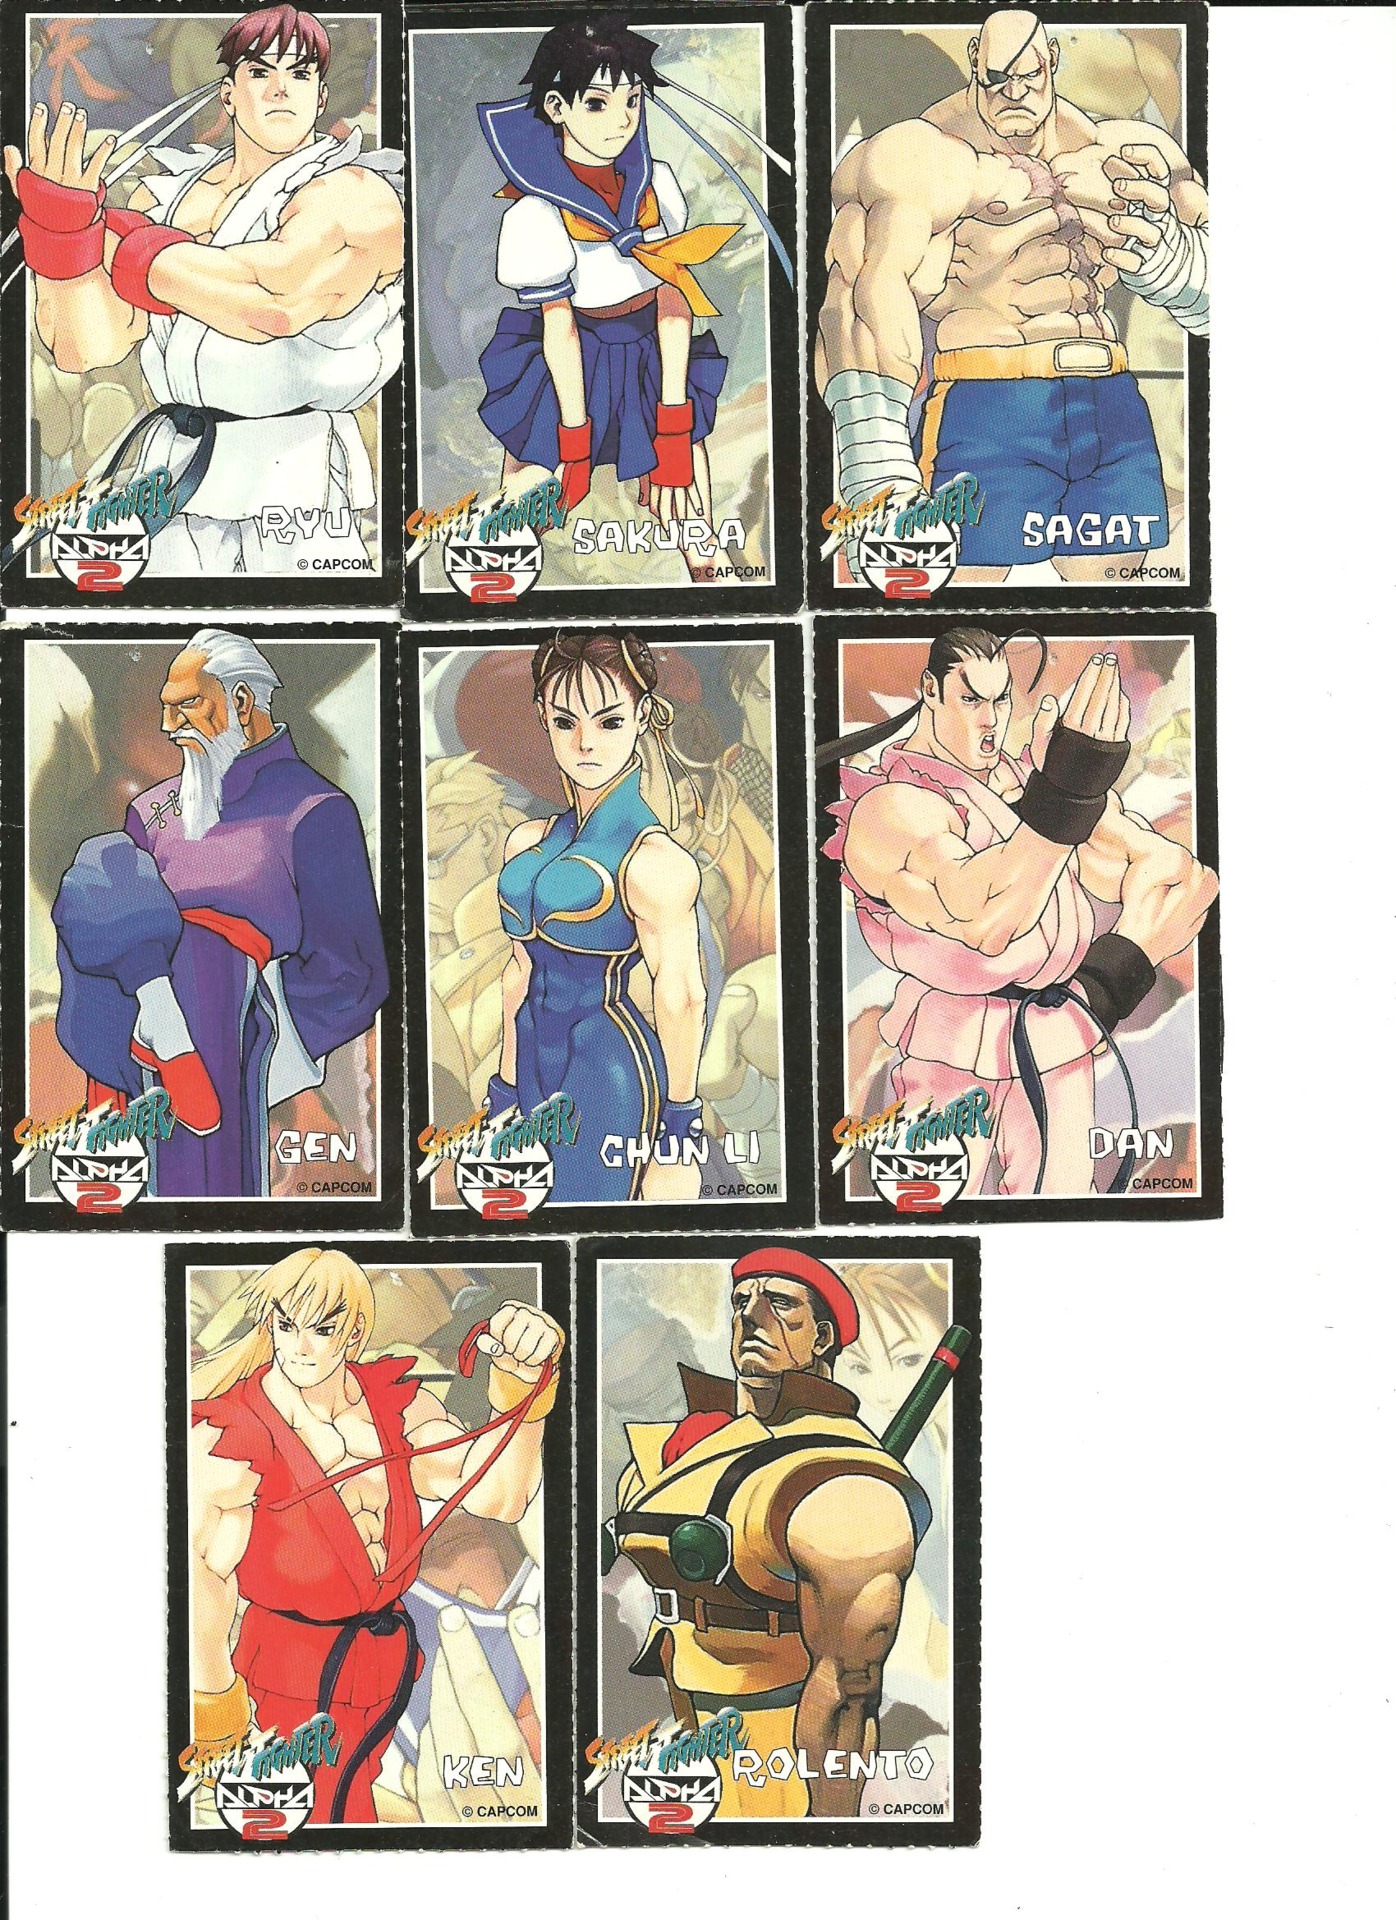 Waiting for Street Fighter 3 became a running joke in my youth, but then it did come out... Sadness replaced laughter.